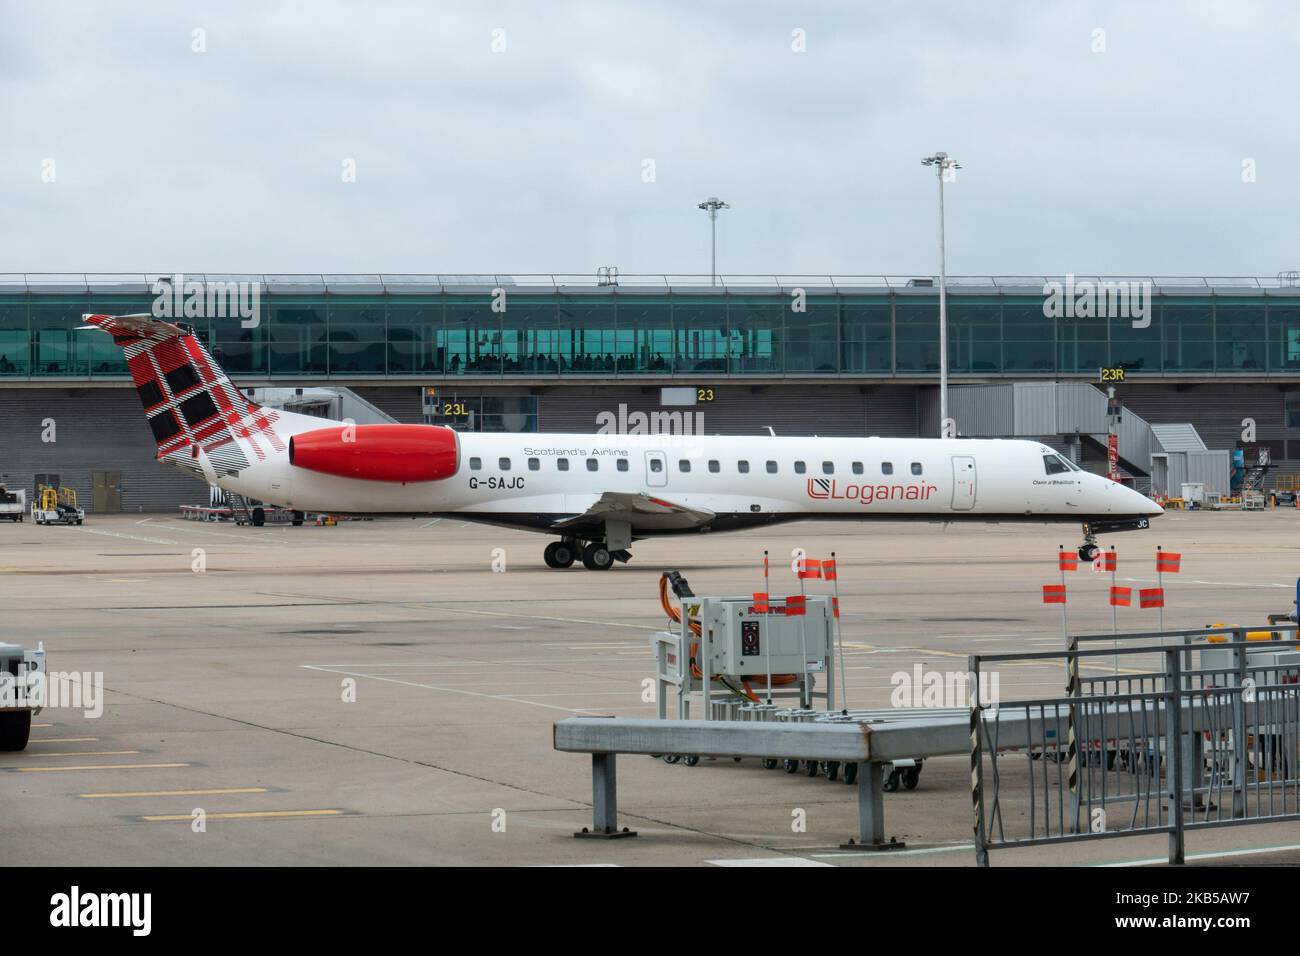 Loganair Embraer ERJ-145 aircraft as seen taxiing at London Stansted International Airport STN EGSS in England, UK on 1st August 2019. The regional jet airplane has registration G-SAJC and is flying since June 2000, for British Midland, then bmi Regional until Dec. 2018. Loganair Scotland's Airline LM LOG has a base at Glasgow. The carrier connects the British capital to Derry and Dundee. (Photo by Nicolas Economou/NurPhoto) Stock Photo